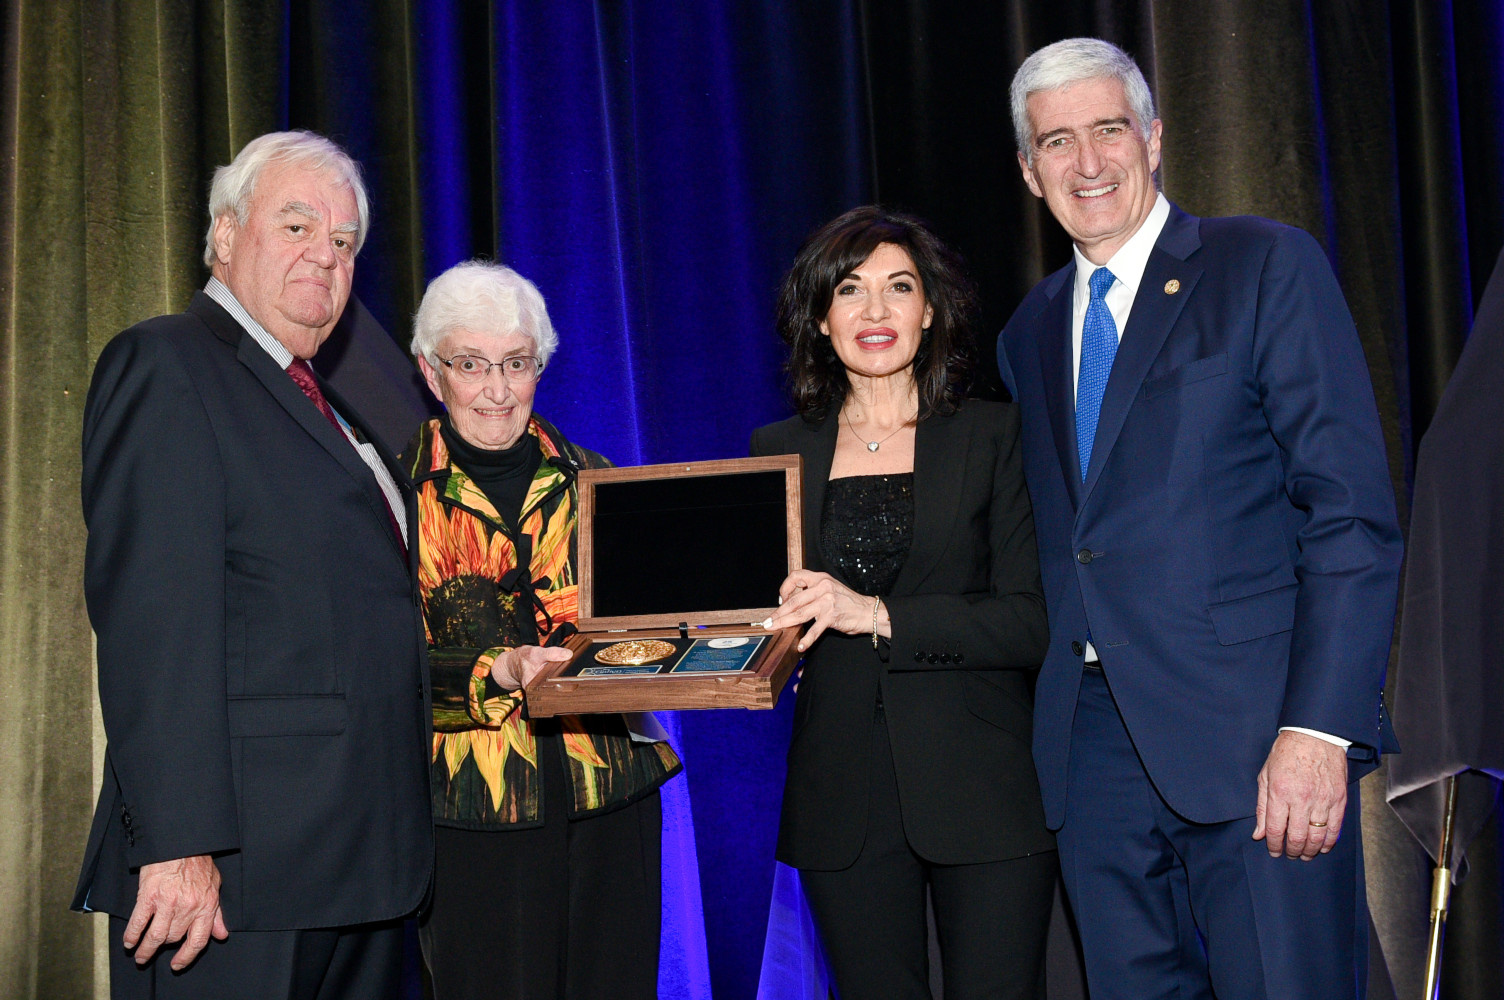 2019 - From left to right: Dr. Jacques Gagné recipient of the Prix Galien Canada 25th
 Anniversary Medal of Honor; Dr. Jean Gray, President of the Jury of Prix Galien Canada; 
Sylvia Durgerian, President, IQVIA;  Bernard Lachapelle.